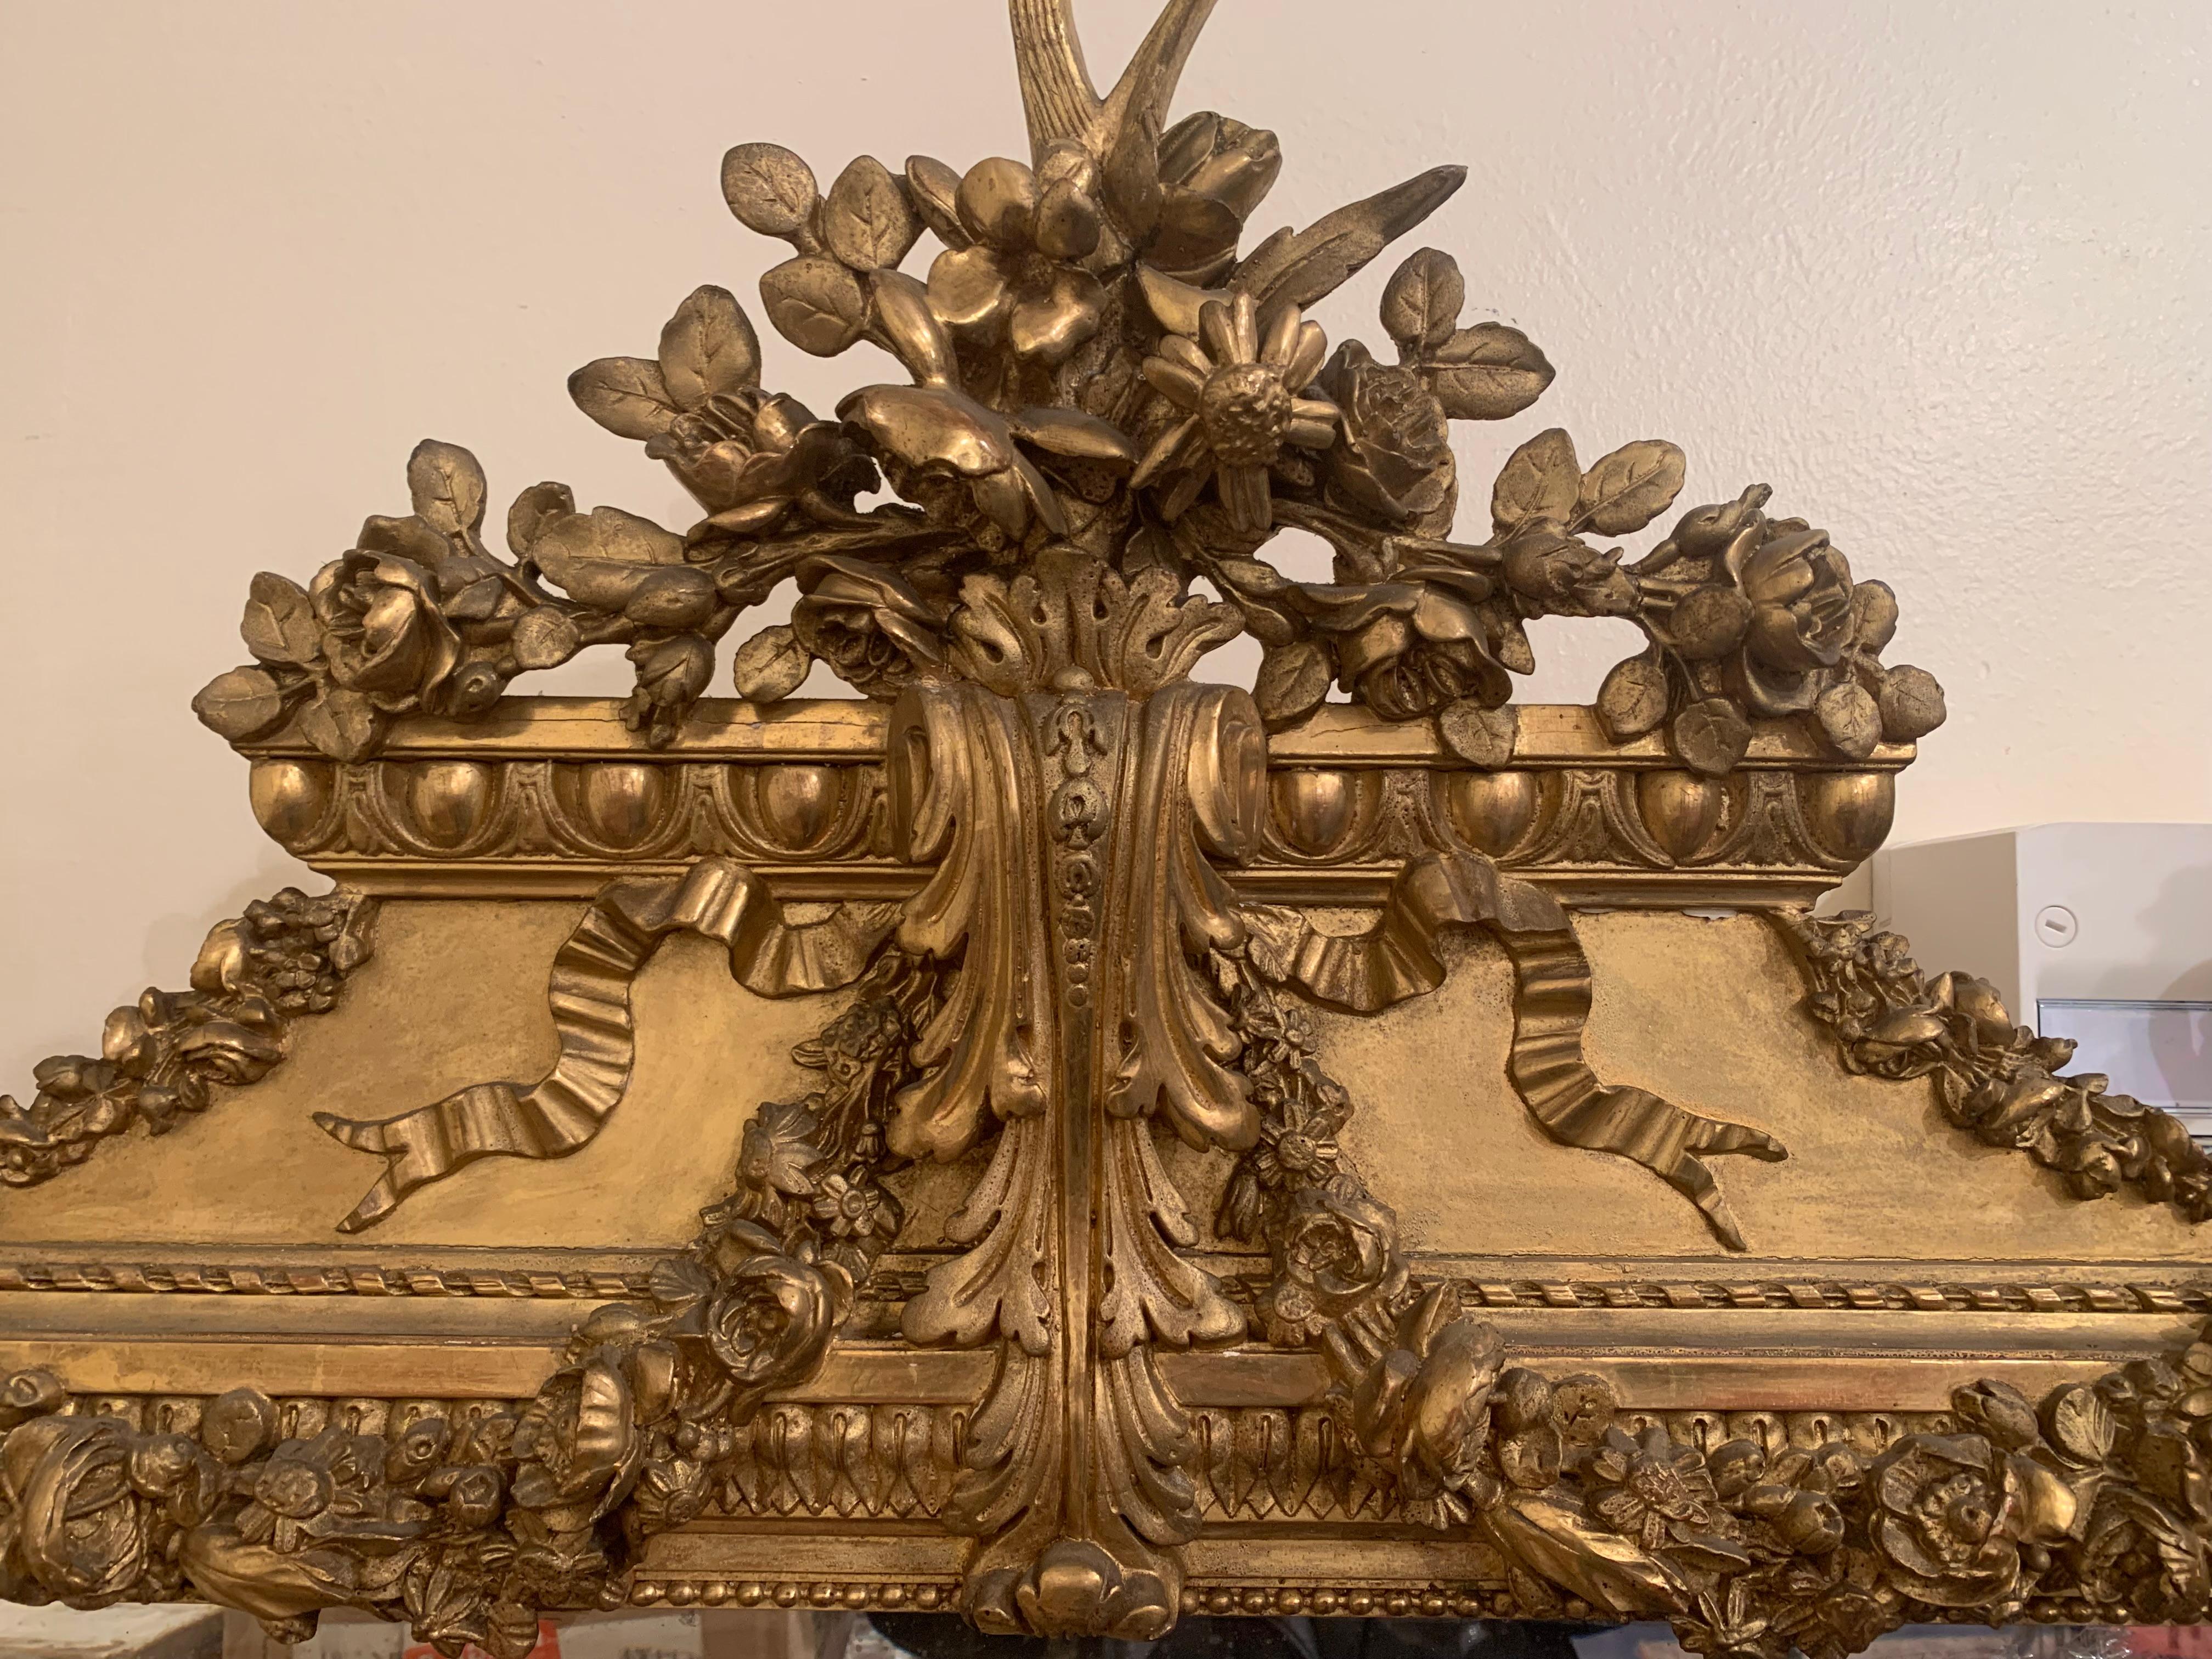 A most elegant French 19th century Louis XVI giltwood mirror. The mirror retains its original mirror plate. A charming richly carved throughout the frame with striking large scrolled leaves at each corner, in the center you have an impressive